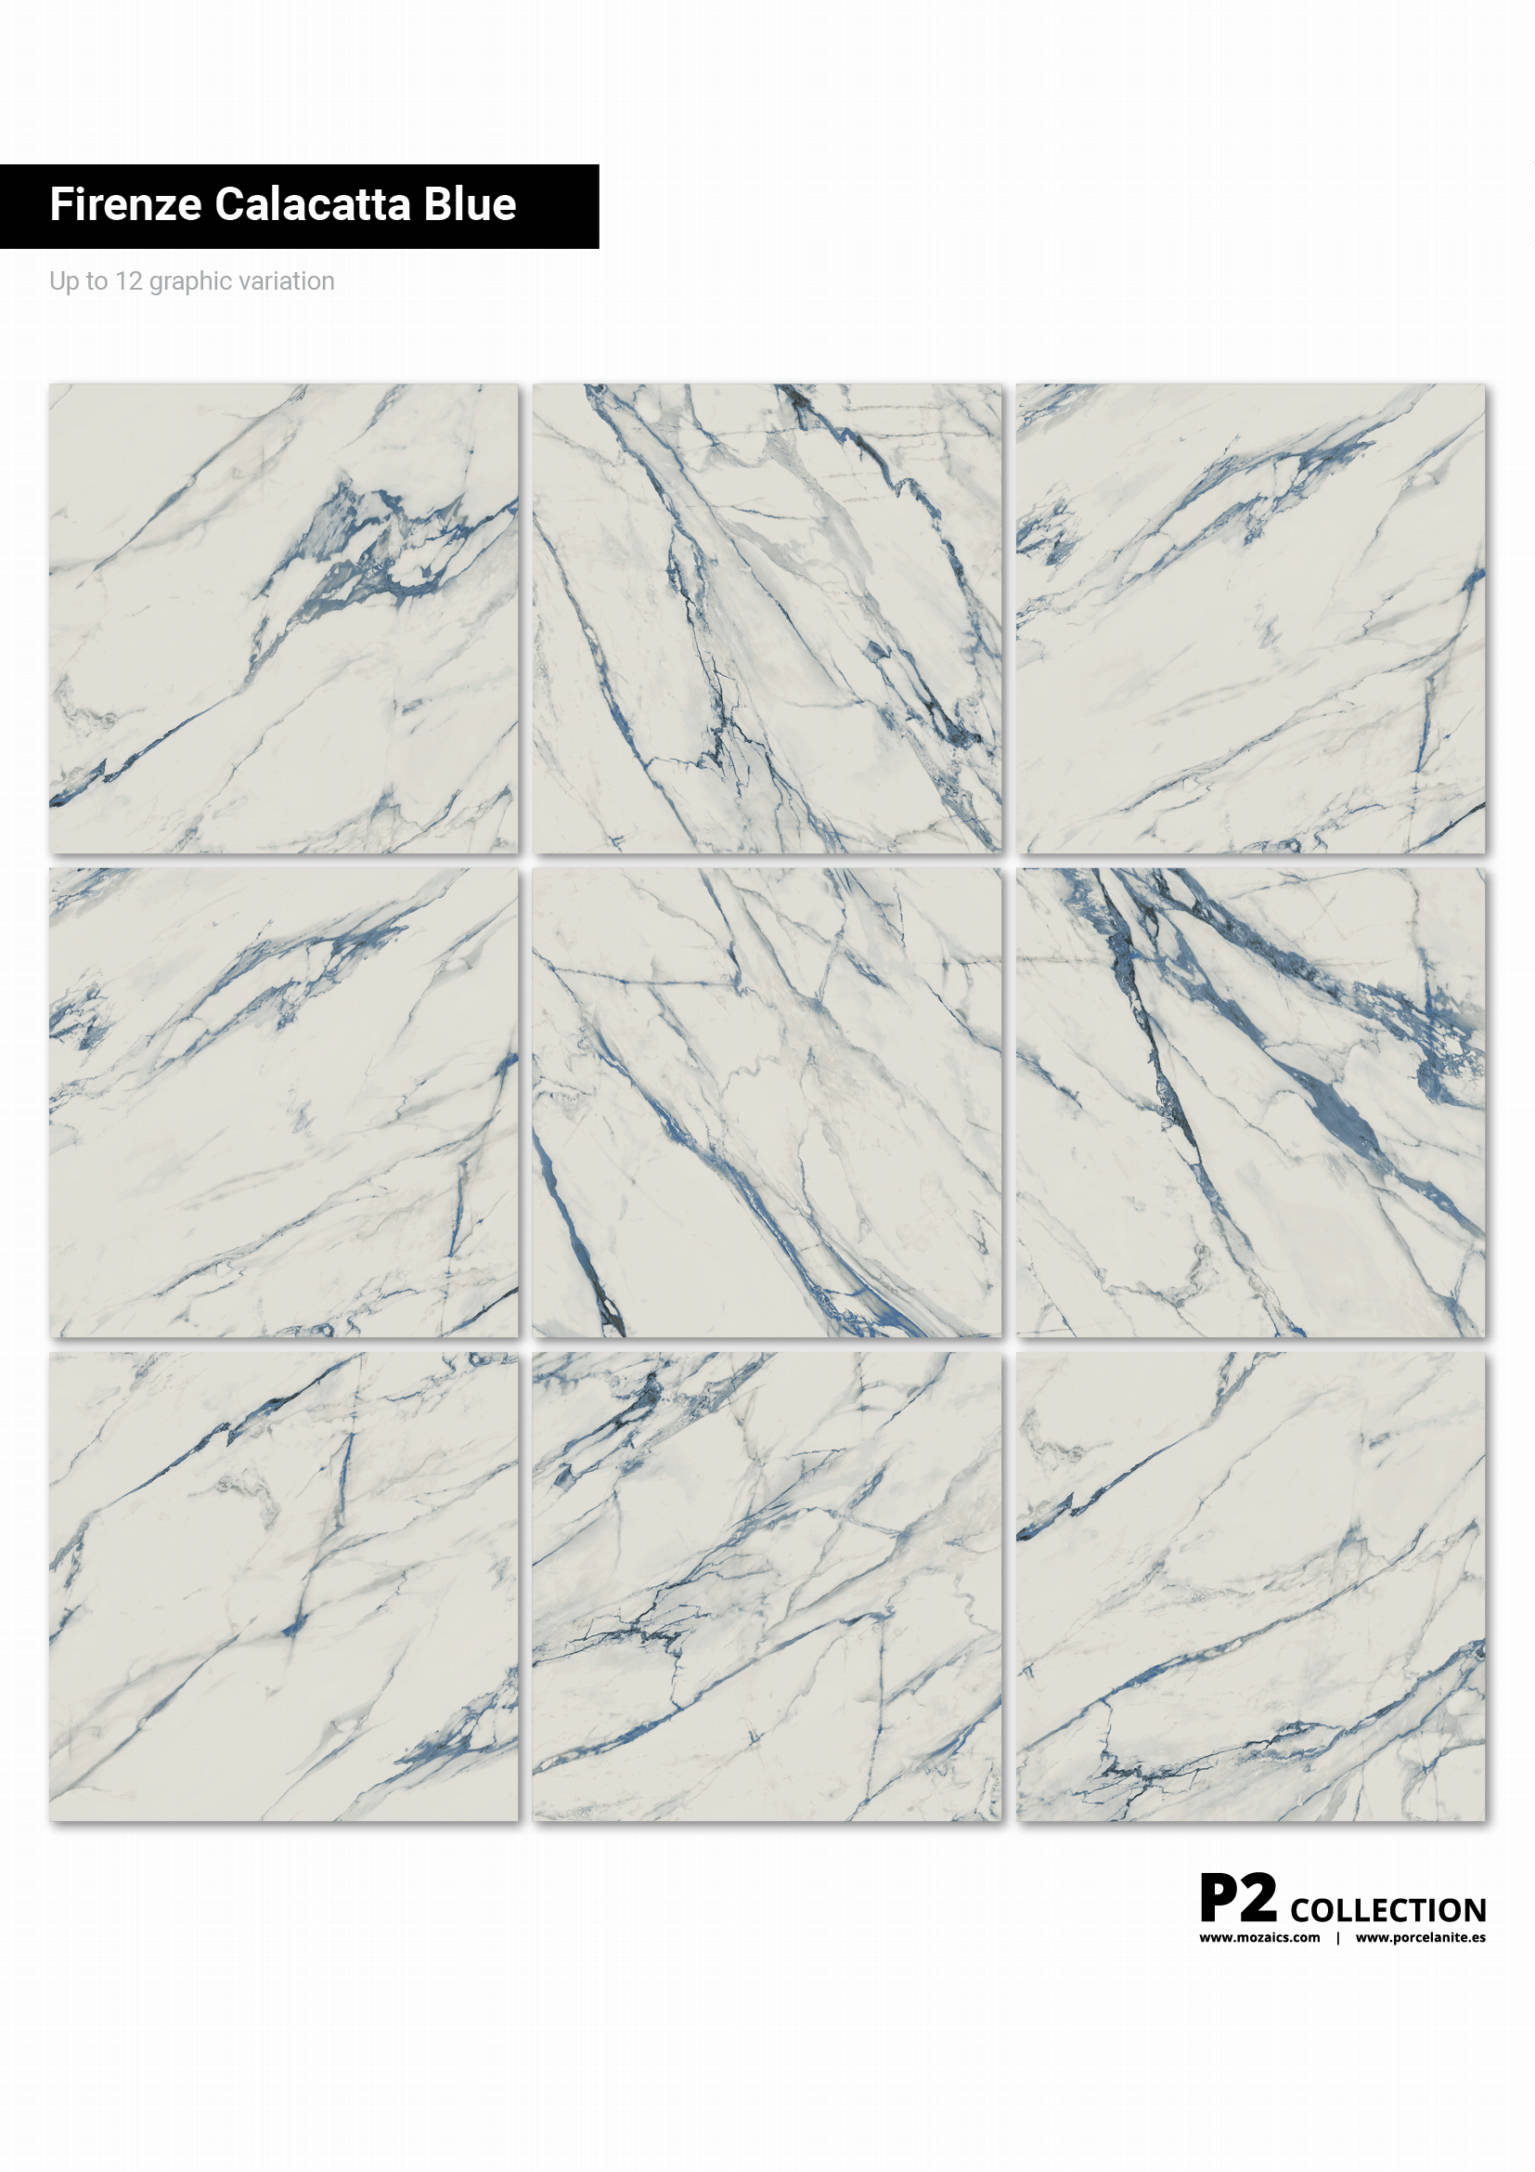 Firenze 1840 Calacatta Blue Polished | Stones And More | Finest selection of Mosaics, Glass, Tile and Stone